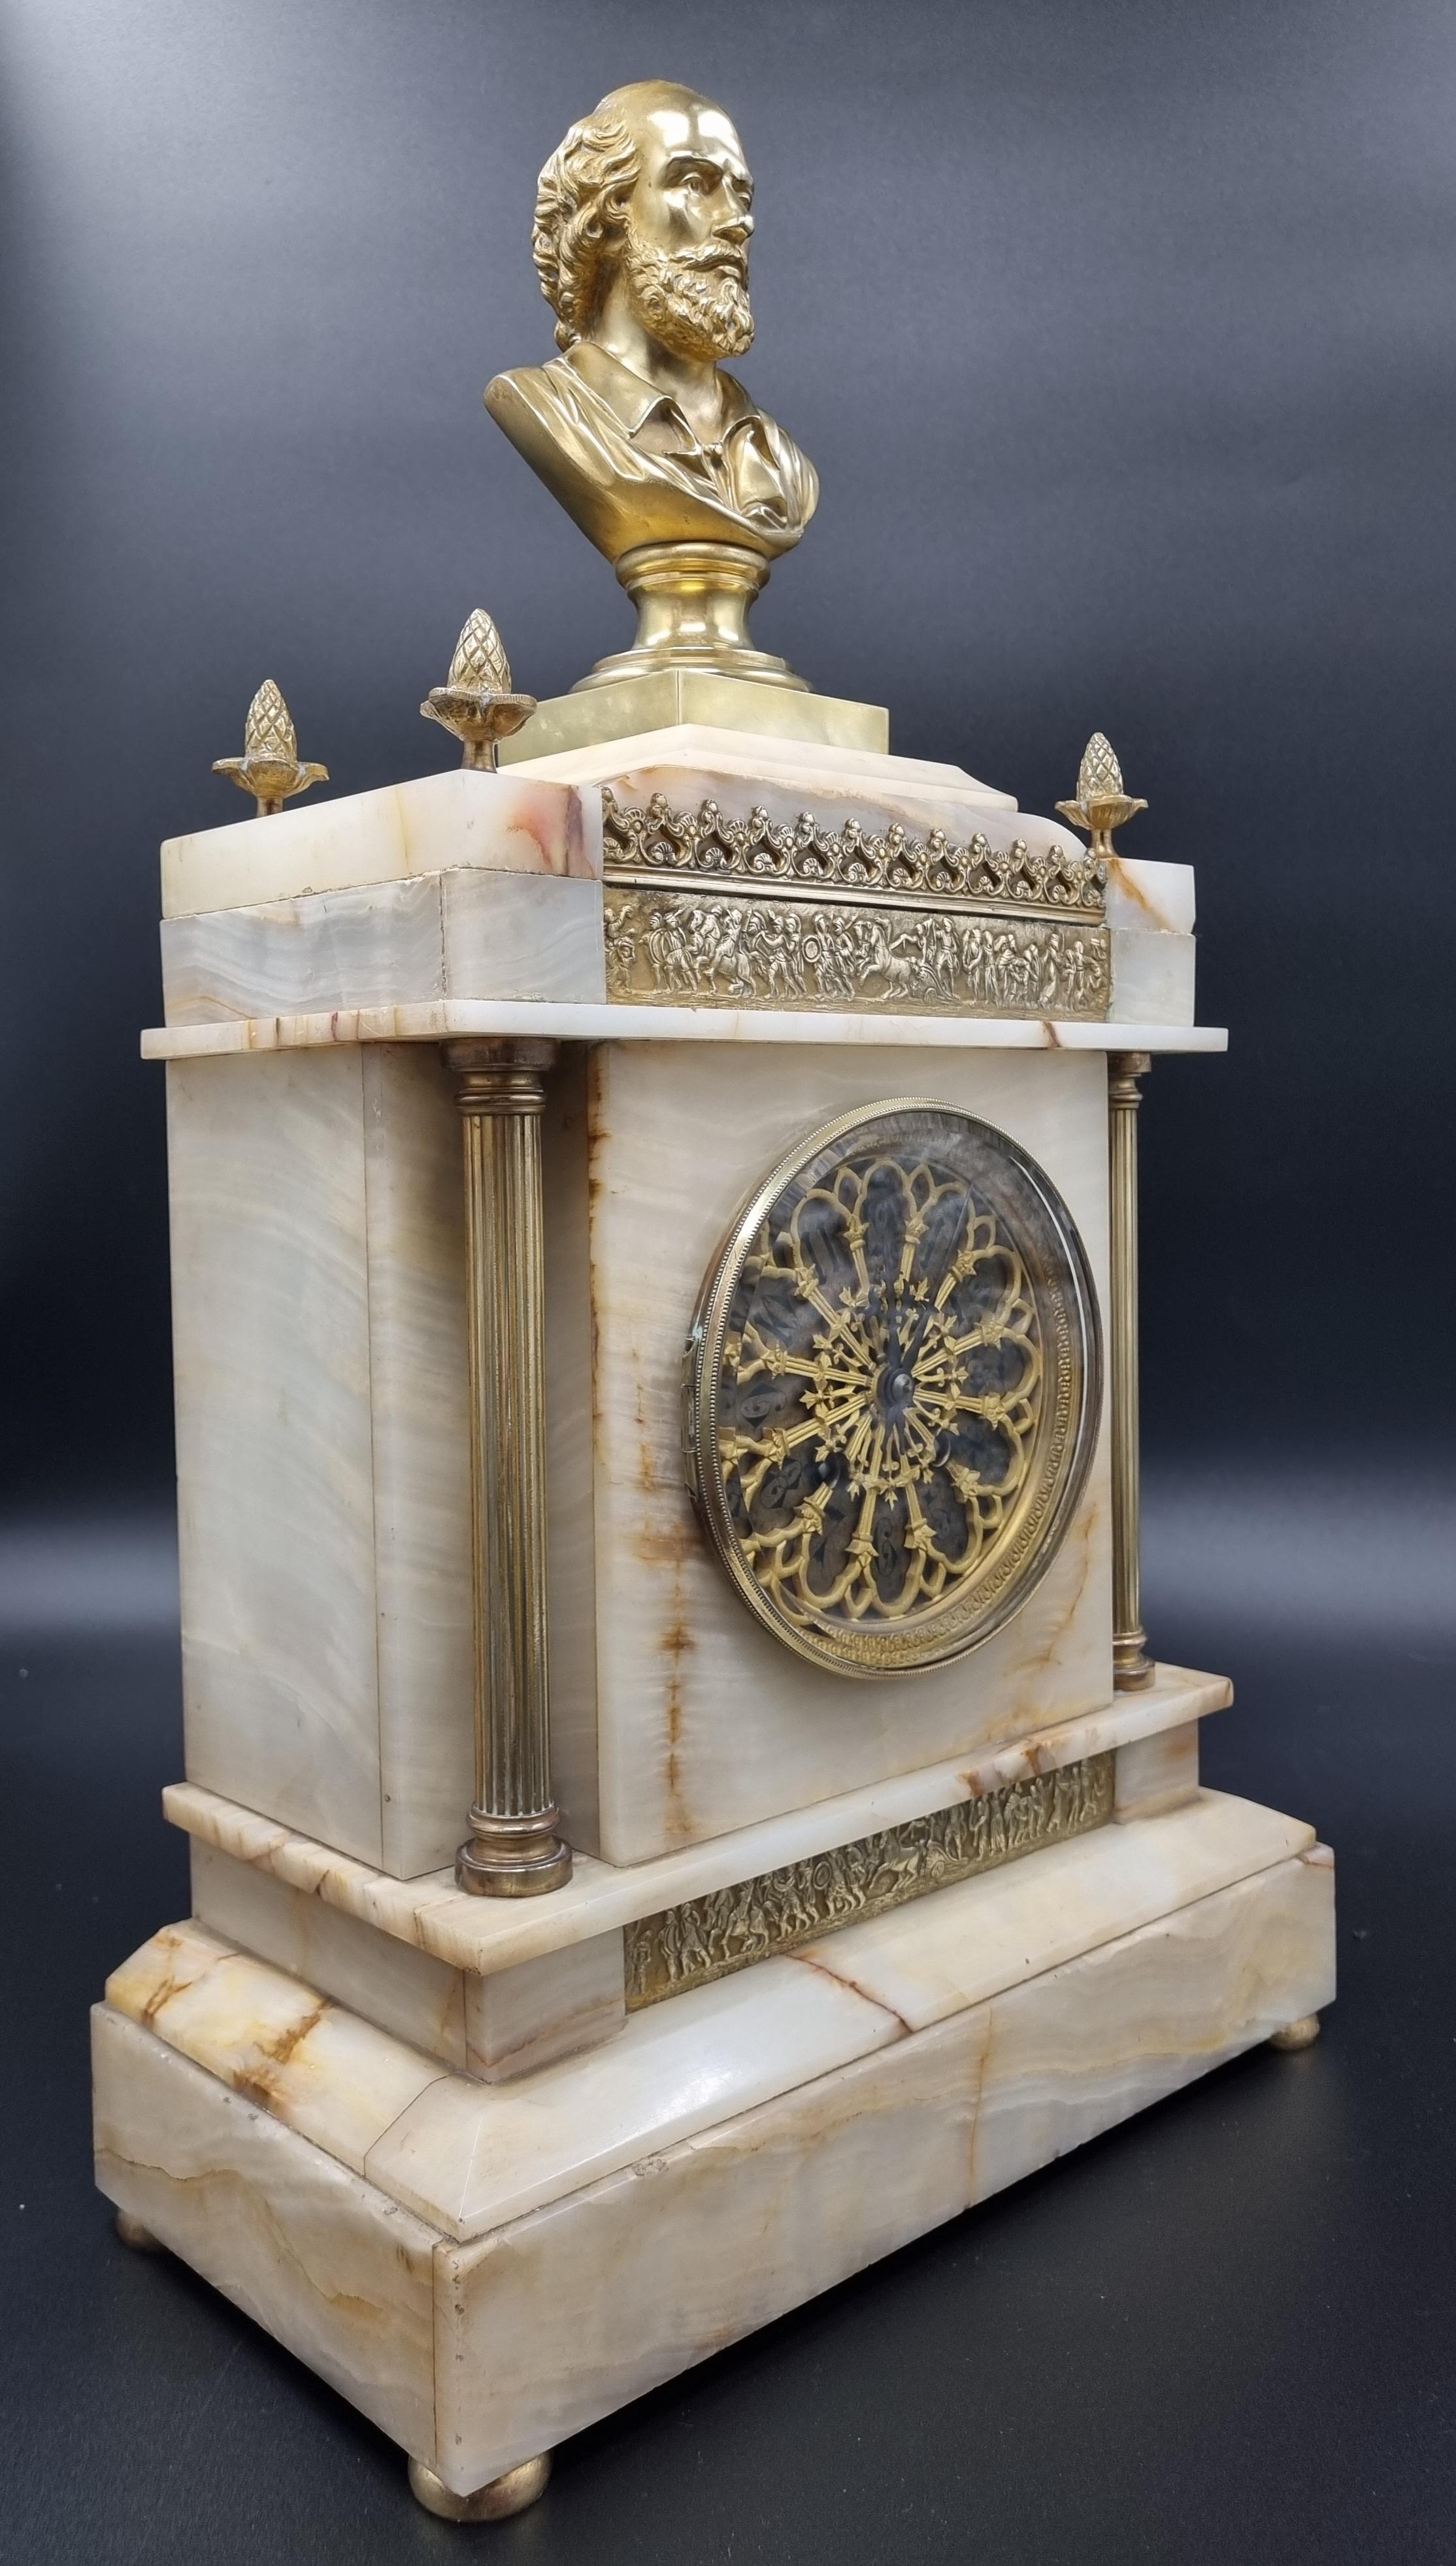 Gothic Revival 19th Century Onyx and Bronze Clock with William Shakespeare For Sale